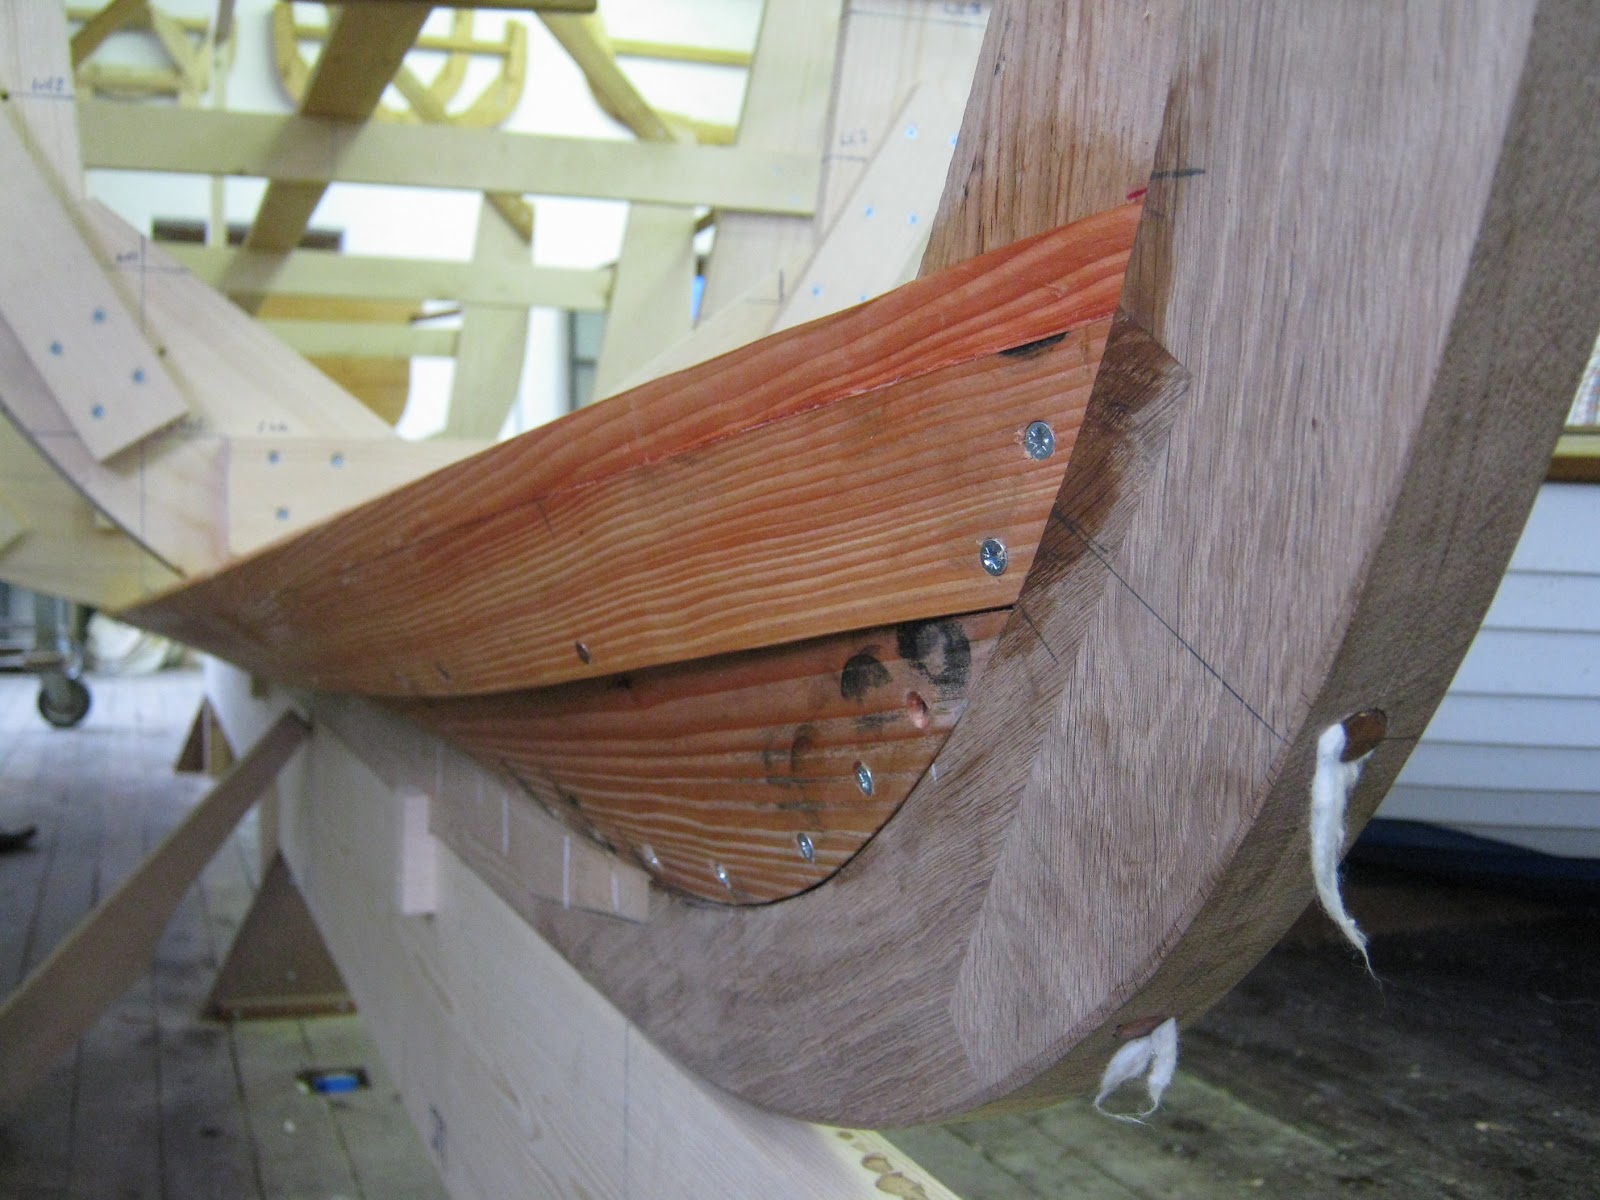  lapstrake boat plans wooden boat building how to make a model boat